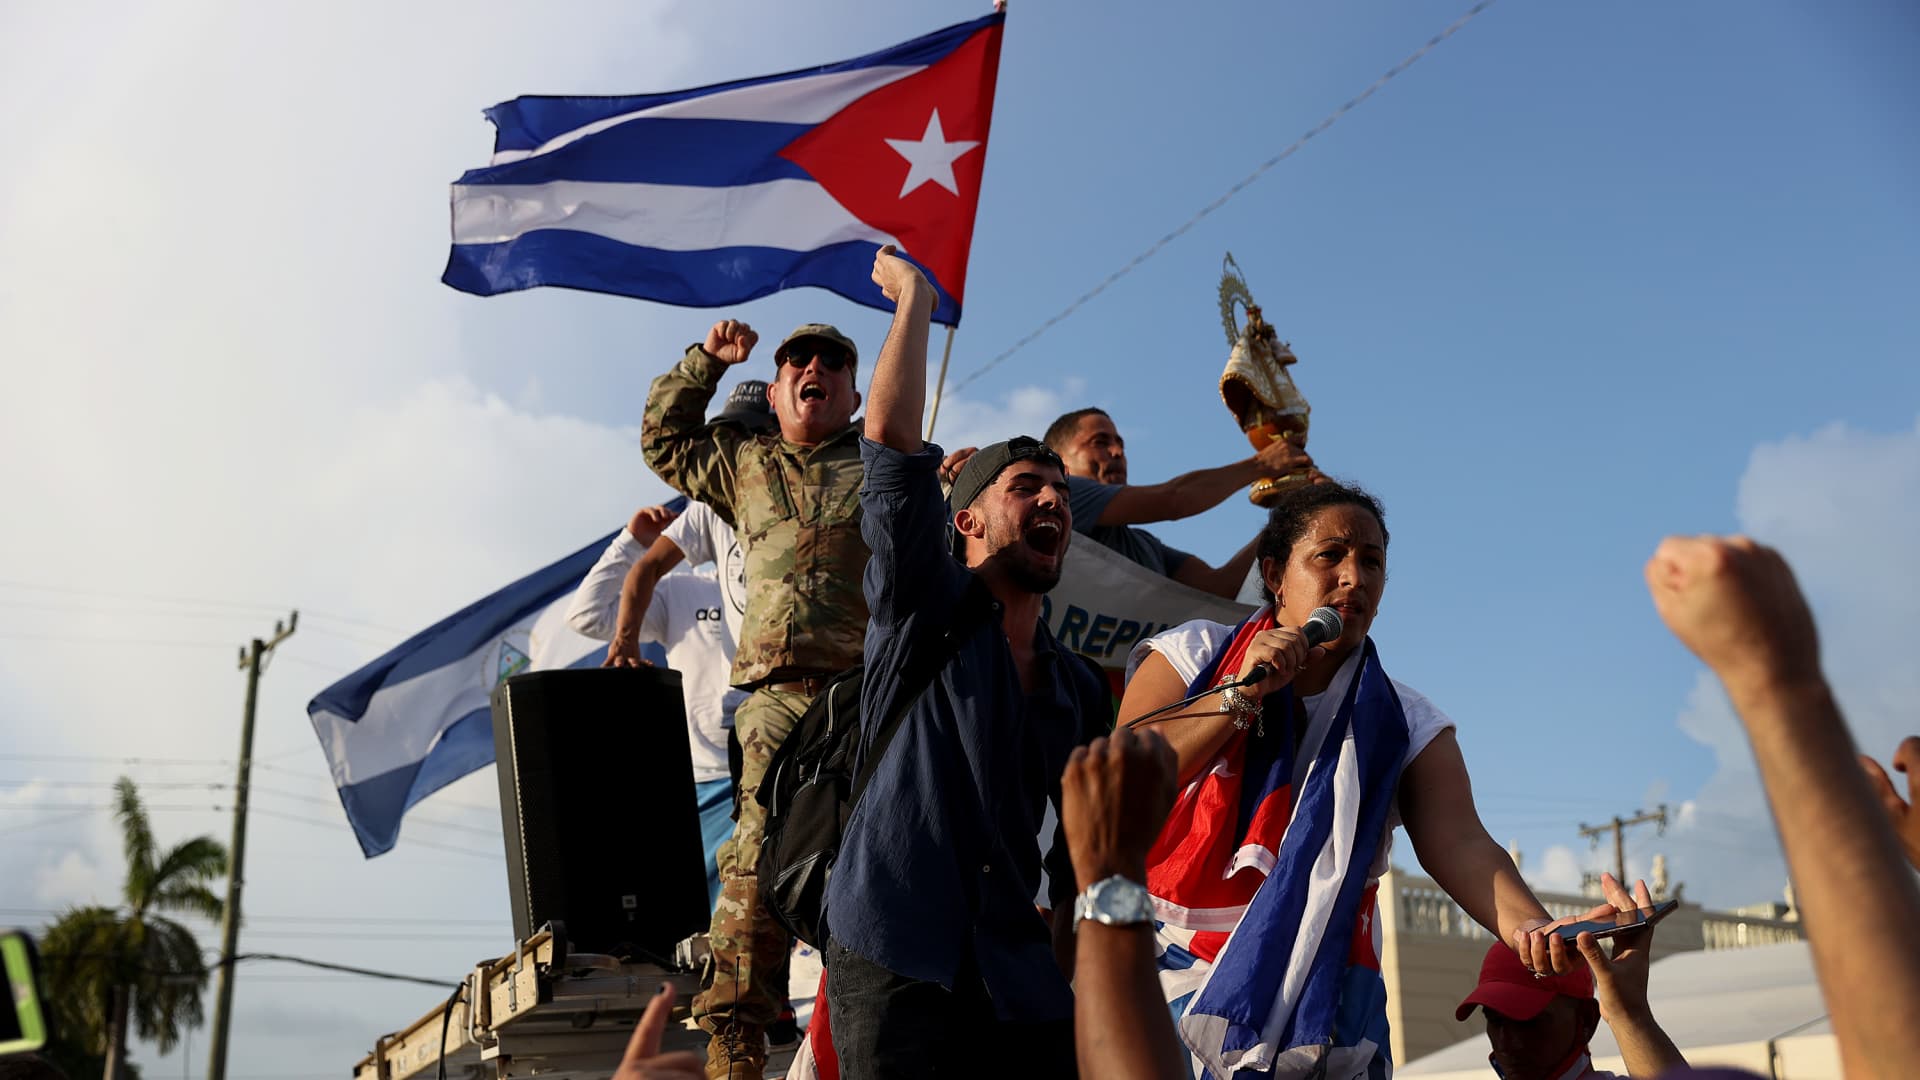 Protesters gather in front of the Versailles restaurant to show support for the people in Cuba who have taken to the streets there to protest on July 11, 2021 in Miami, Florida.